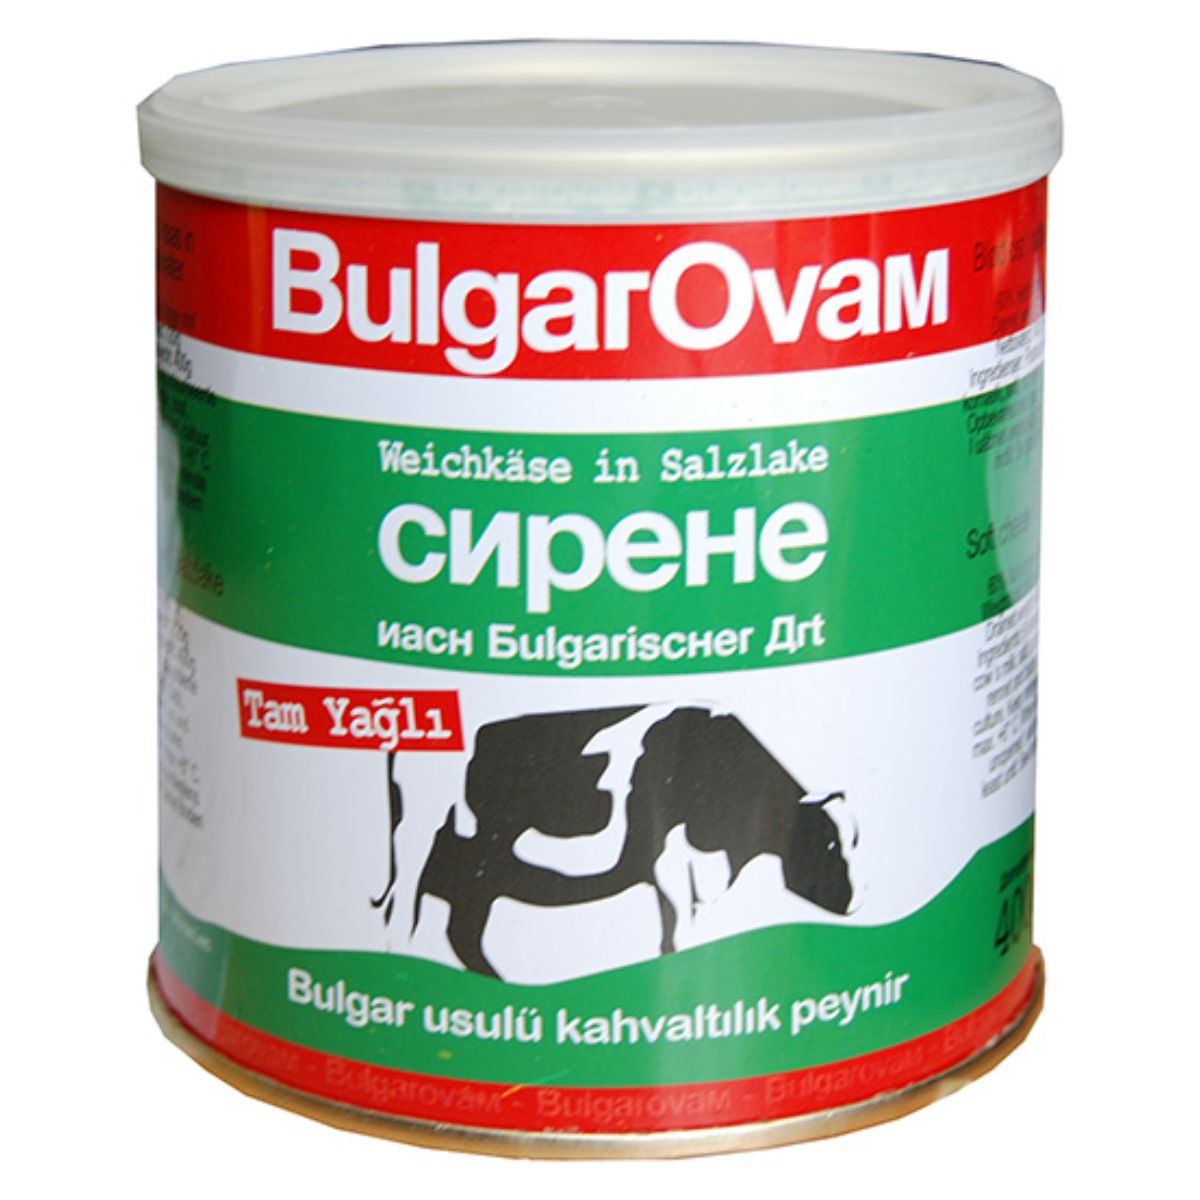 A can of Bulgarovam - Cheese - 400g with the brand name bulgarovam, featuring multilingual labels and a black and white cow illustration.